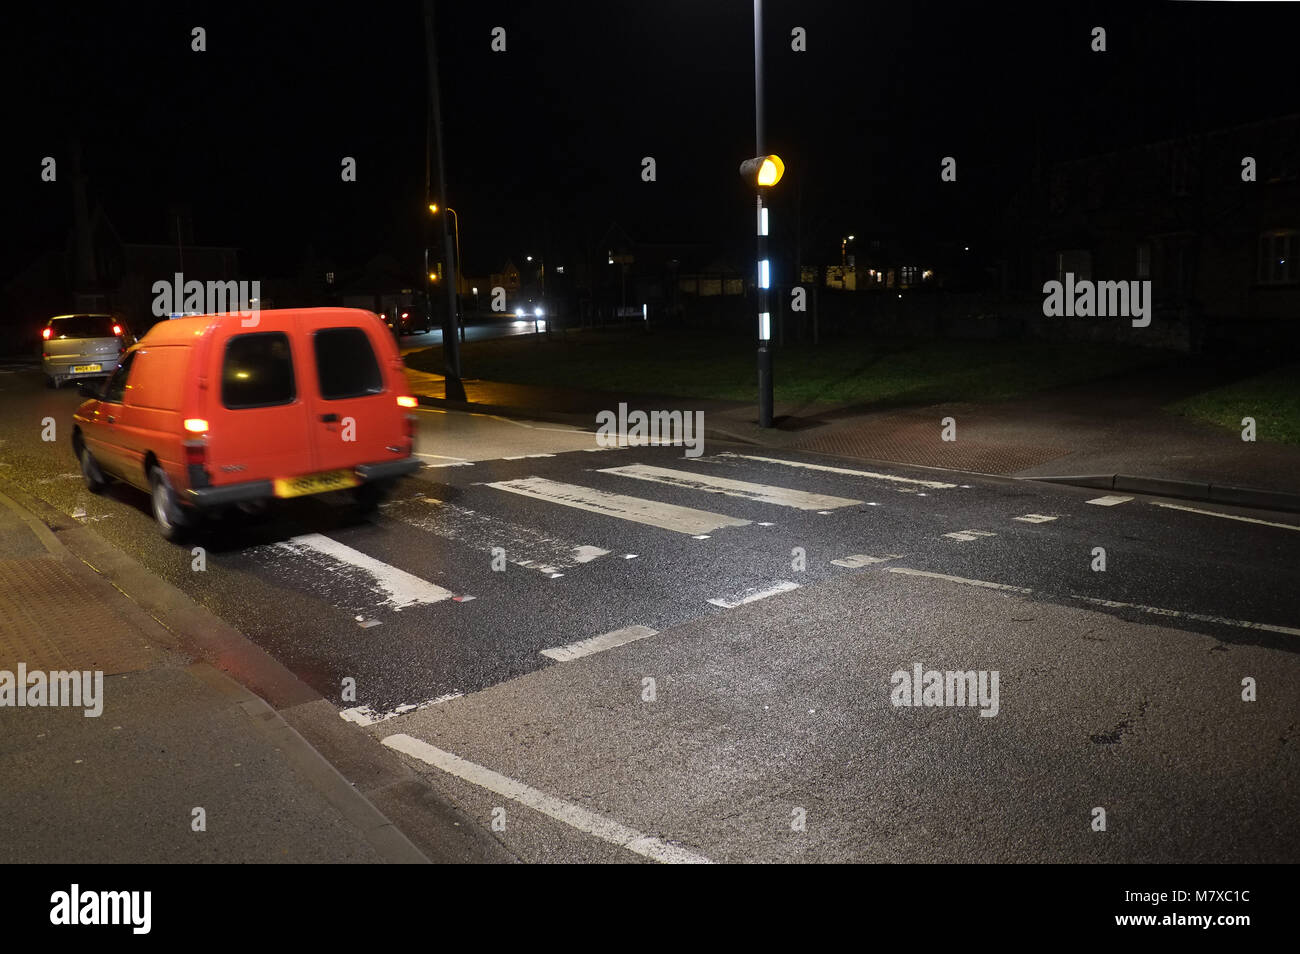 January 2018 - Village zebra road crossing at night with a old red van passing Stock Photo